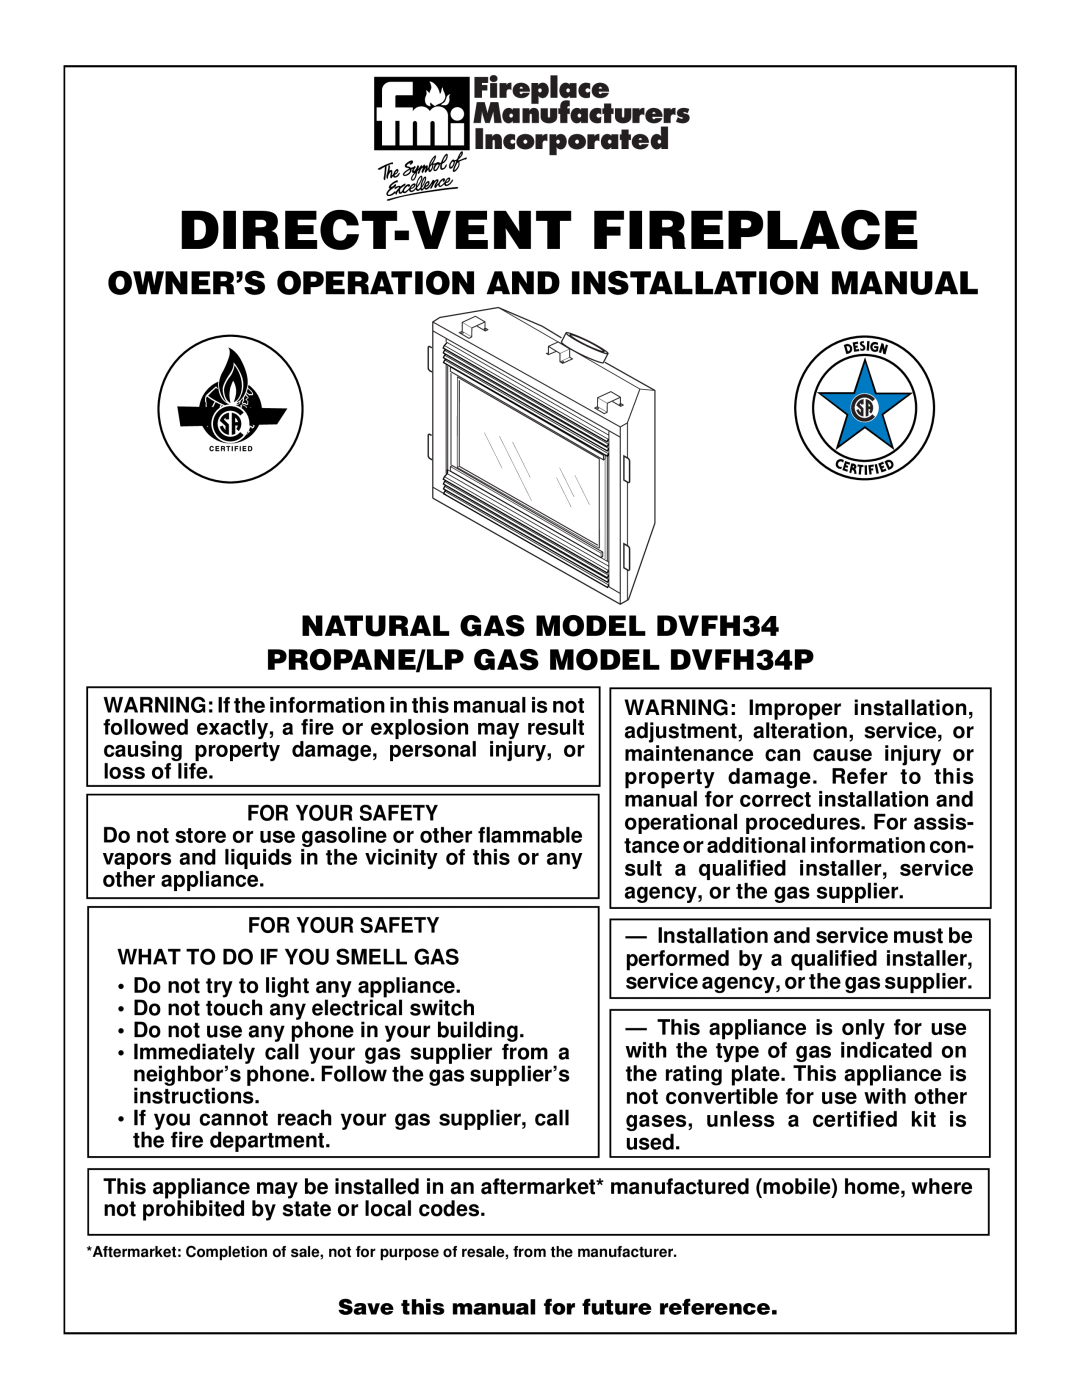 Desa DVFH34P installation manual Owner’S Operation And Installation Manual, NATURAL GAS MODEL DVFH34, Direct-Ventfireplace 